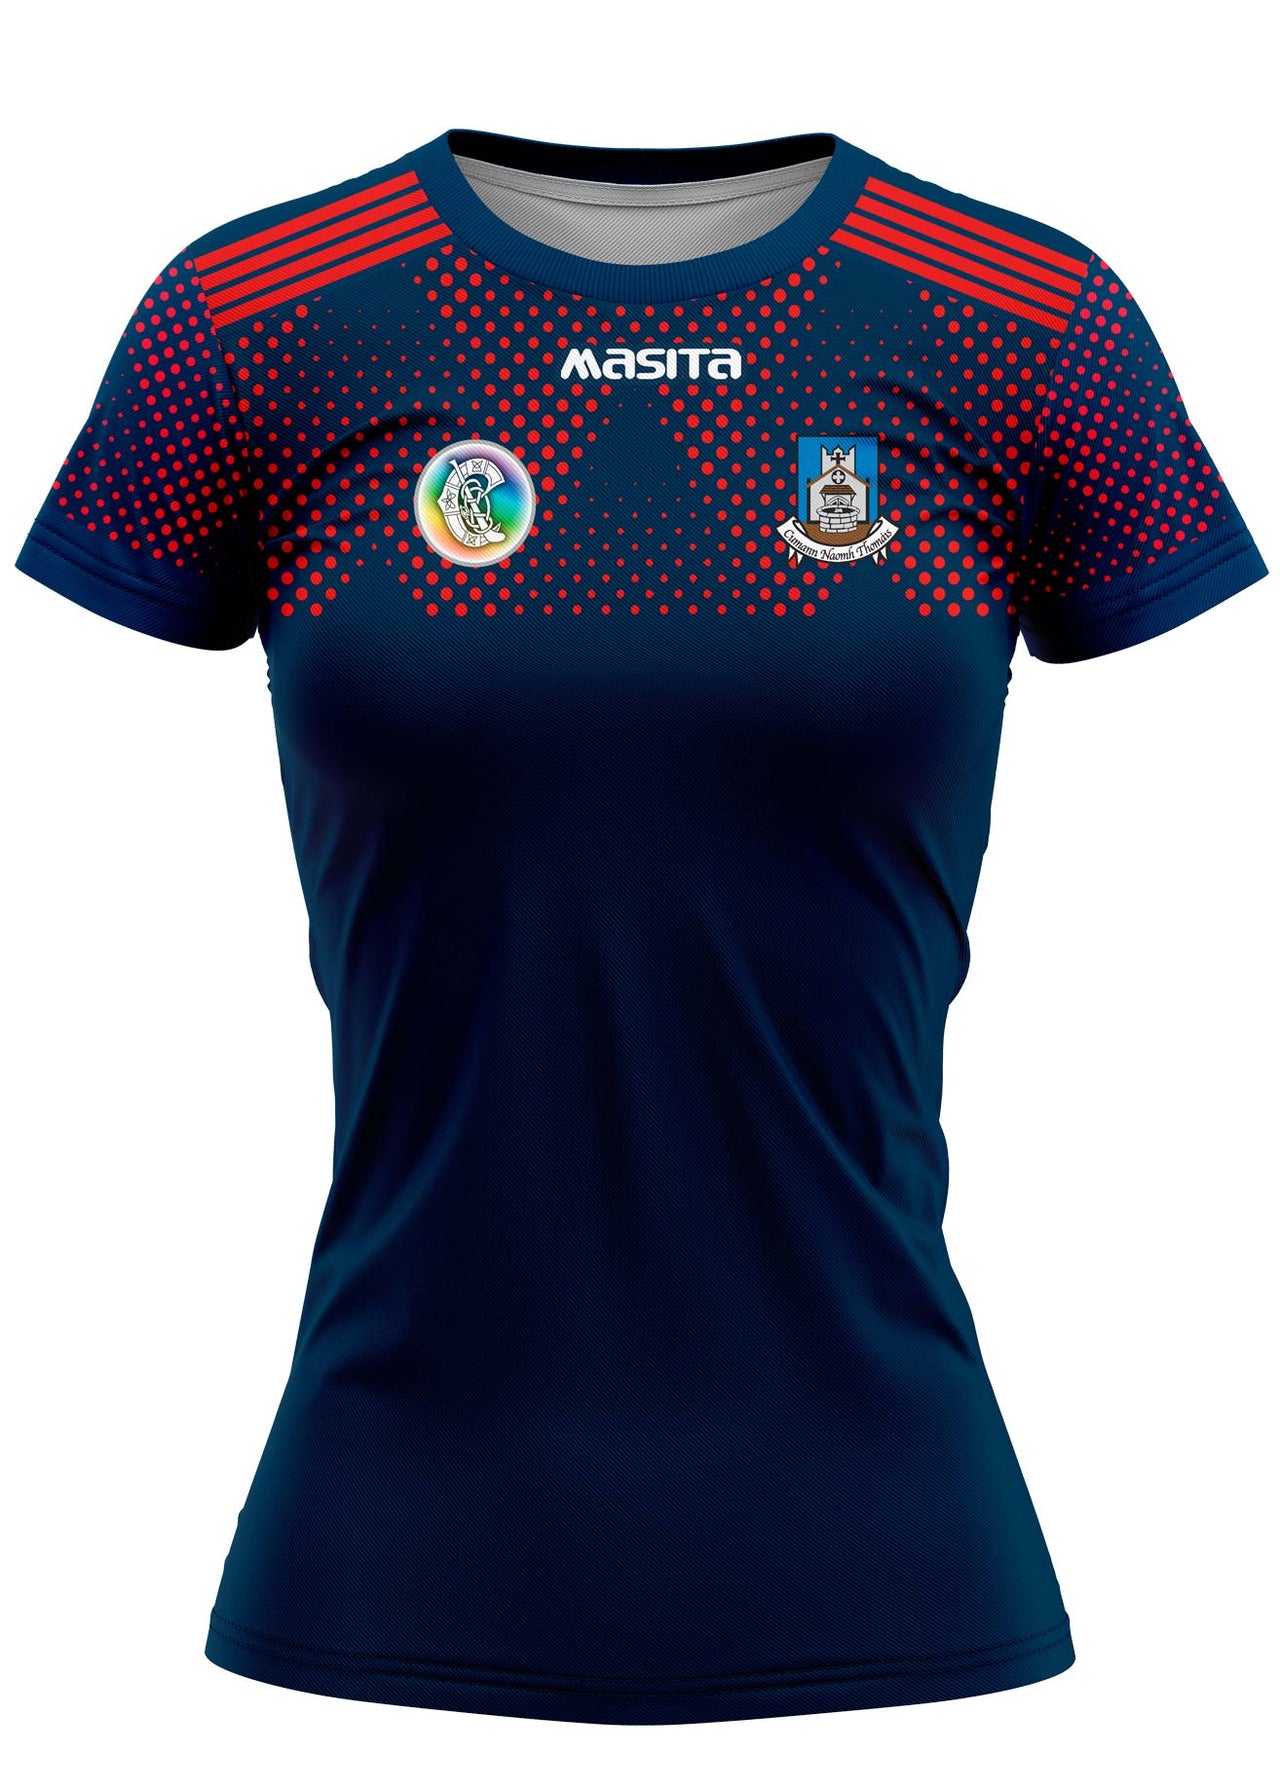 St Thomas' Camogie Juno Style Training Jersey Player Fit Adult